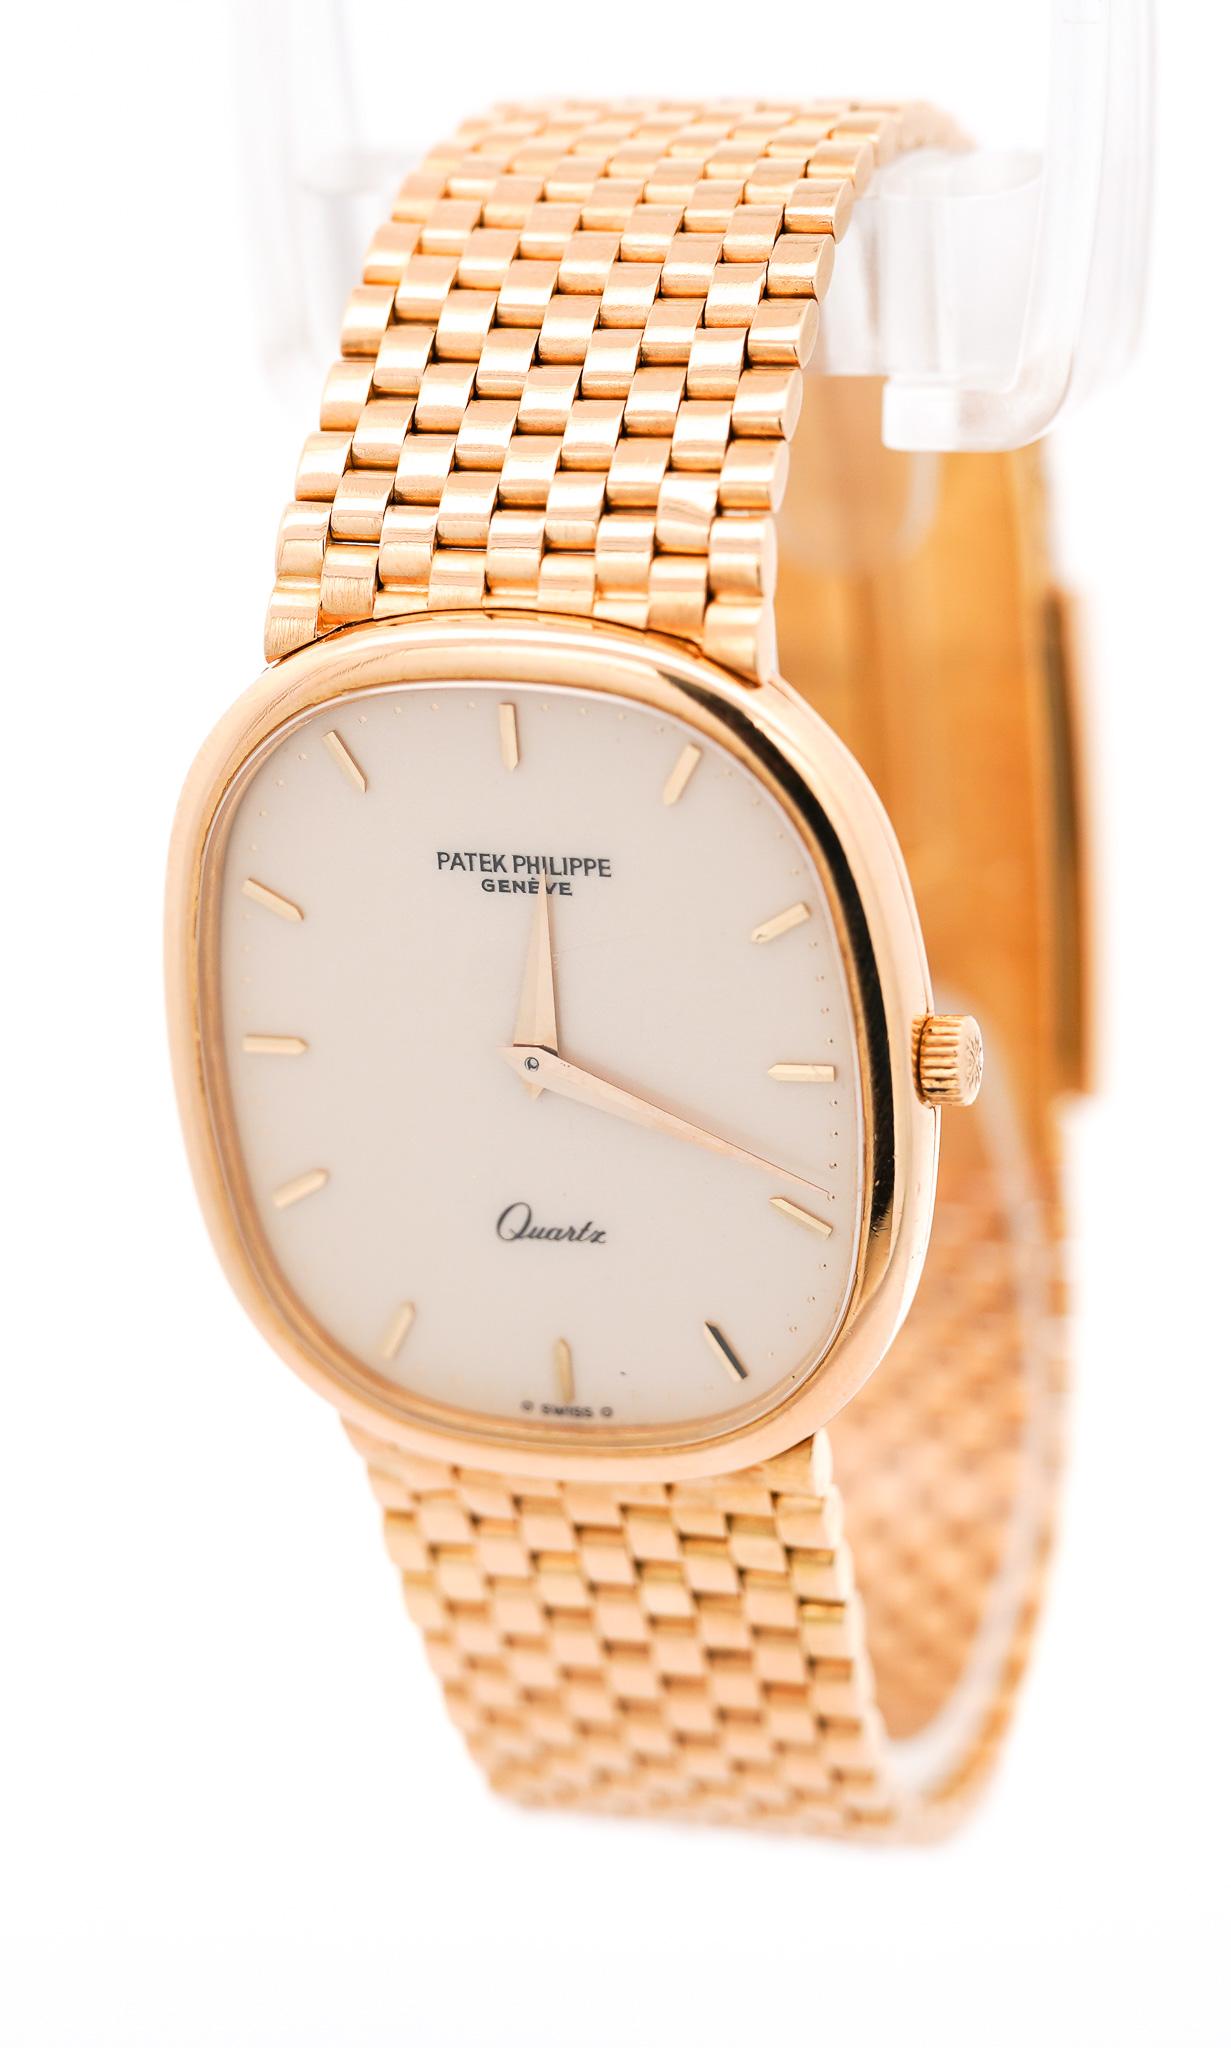 Authentic Pre-Owned Patek Philippe Grand Ellipse 3838 Unisex 18K Yellow Gold Watch. Vintage, circa 1980. Featuring a 31mm dial with a smooth gold bezel, cream-white ivory enamel dial, raised gold button hour markers, and Dauphine hands. Perfectly